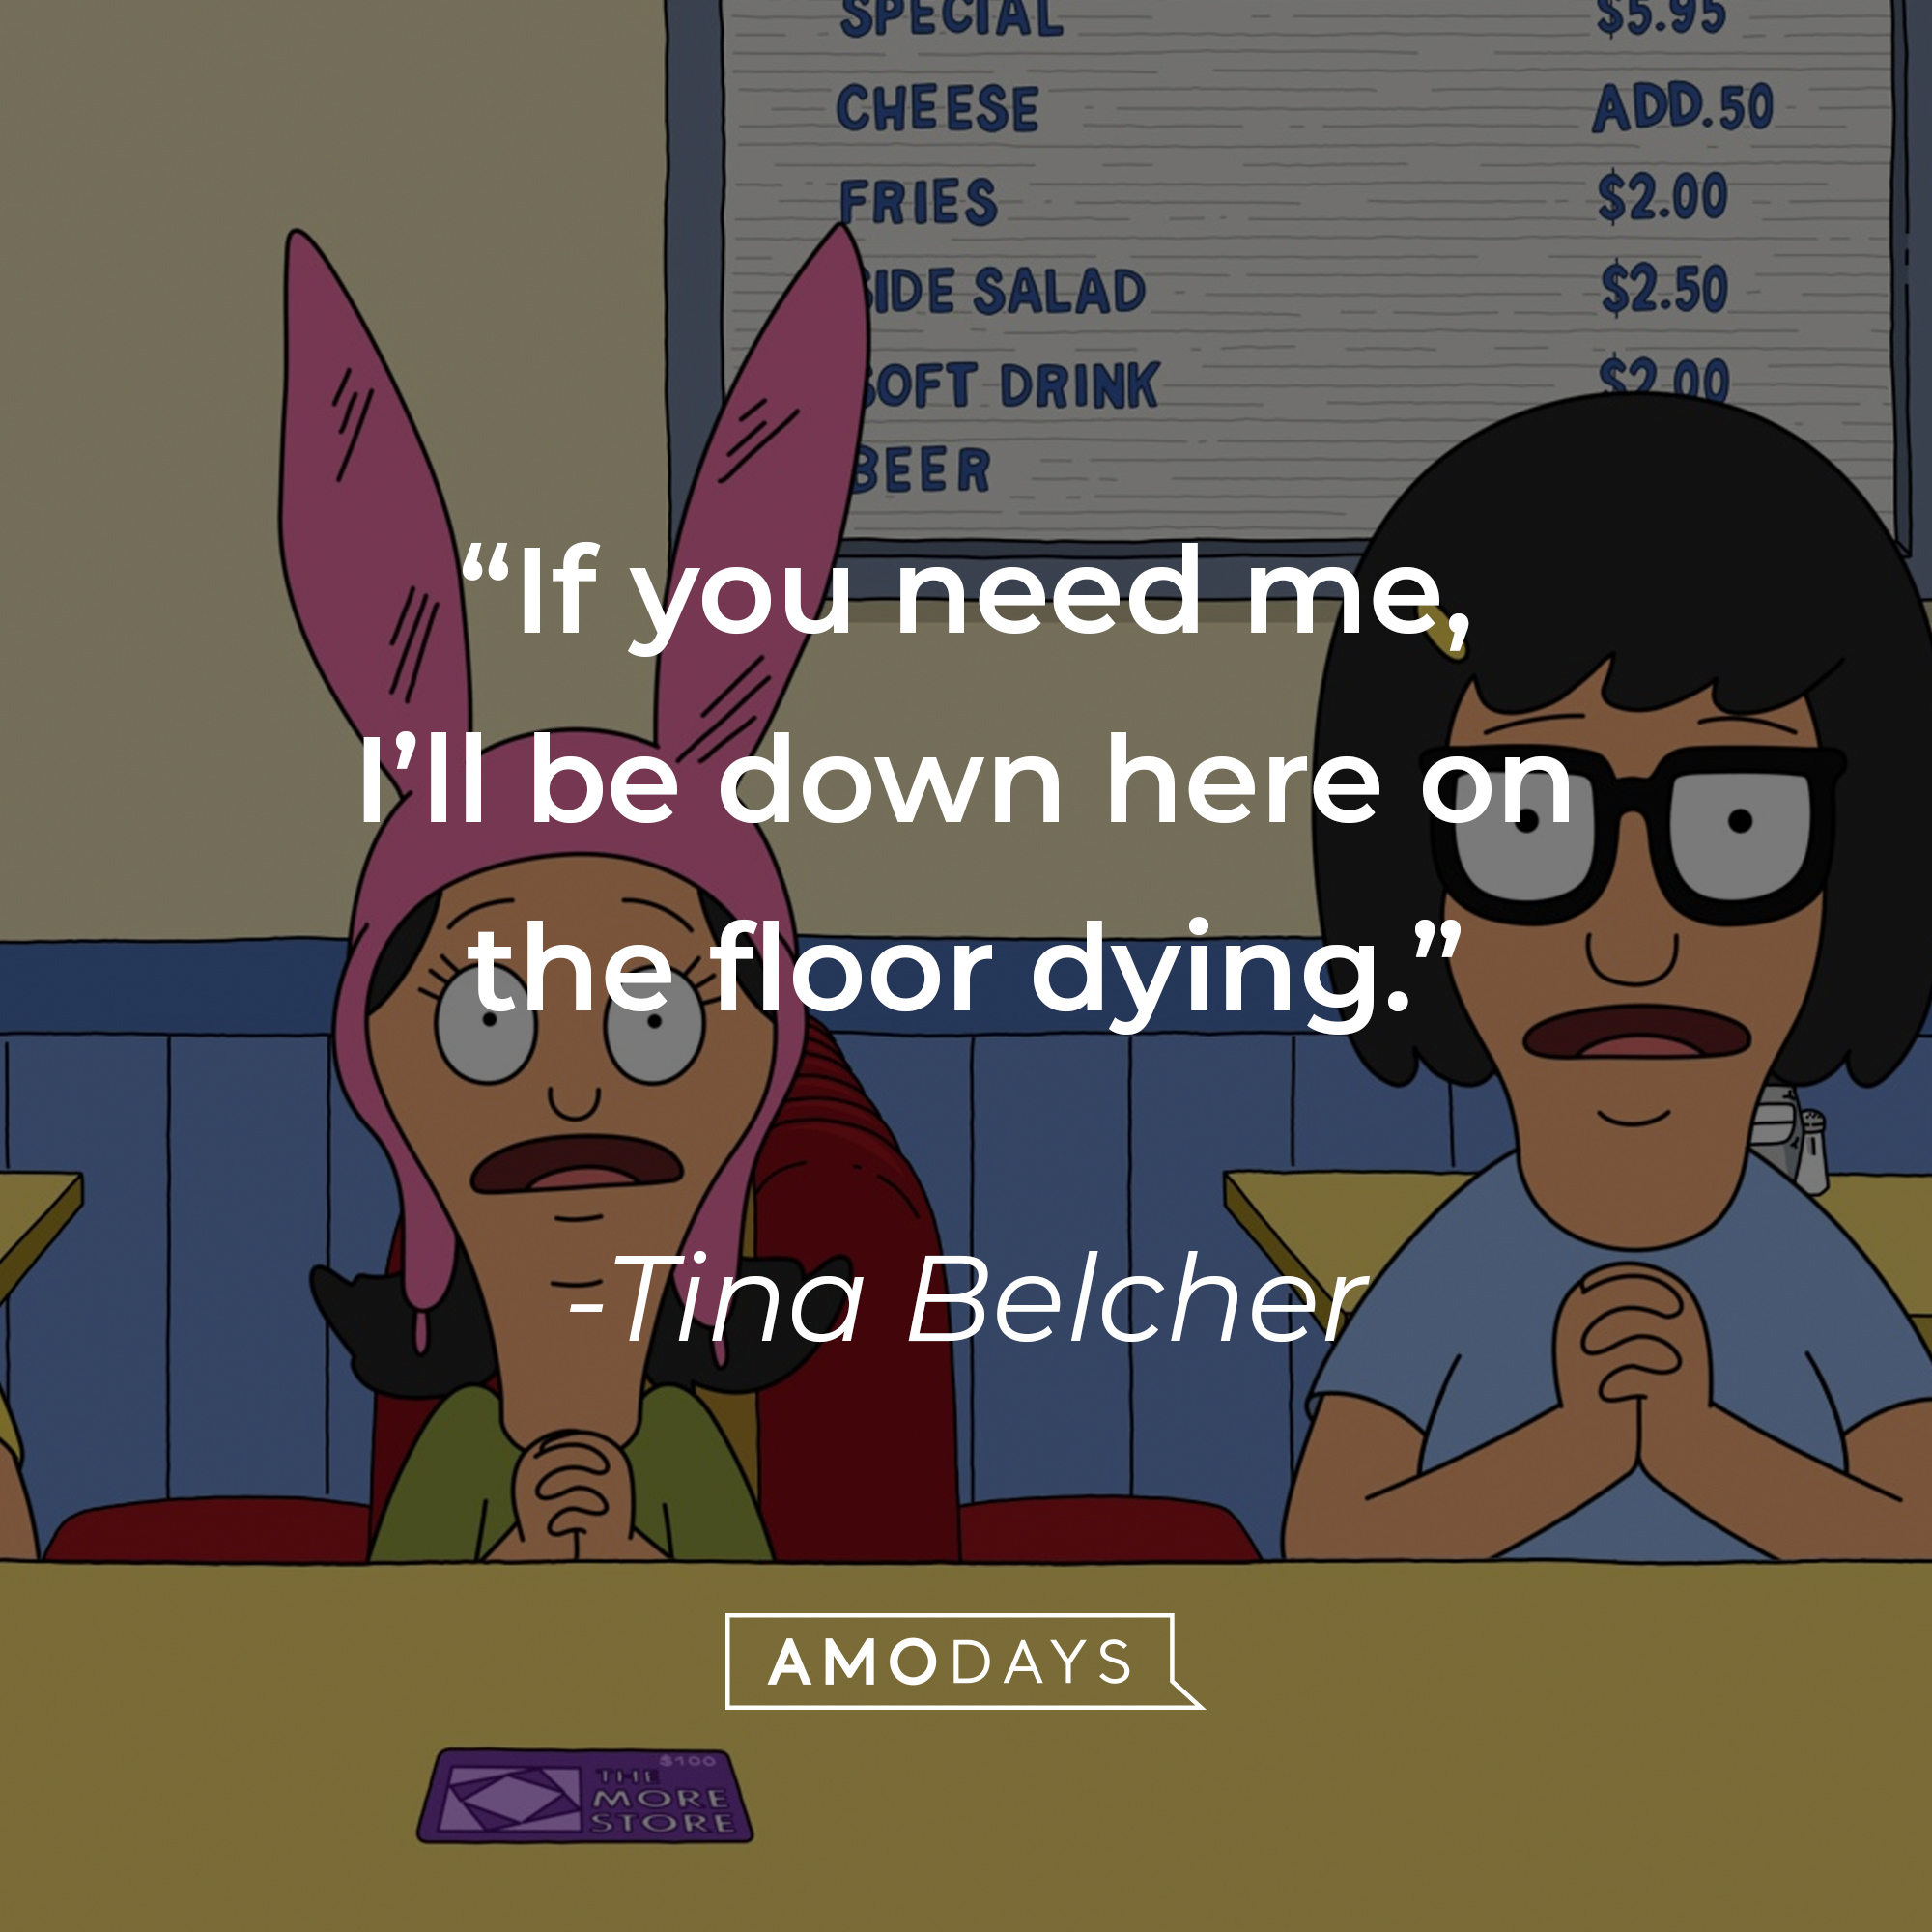 An Image of Tina Belcher with Louise, with Belcher’s quote: “If you need me I’ll be down here on the floor dying.” | Source: Facebook.com/BobsBurgers